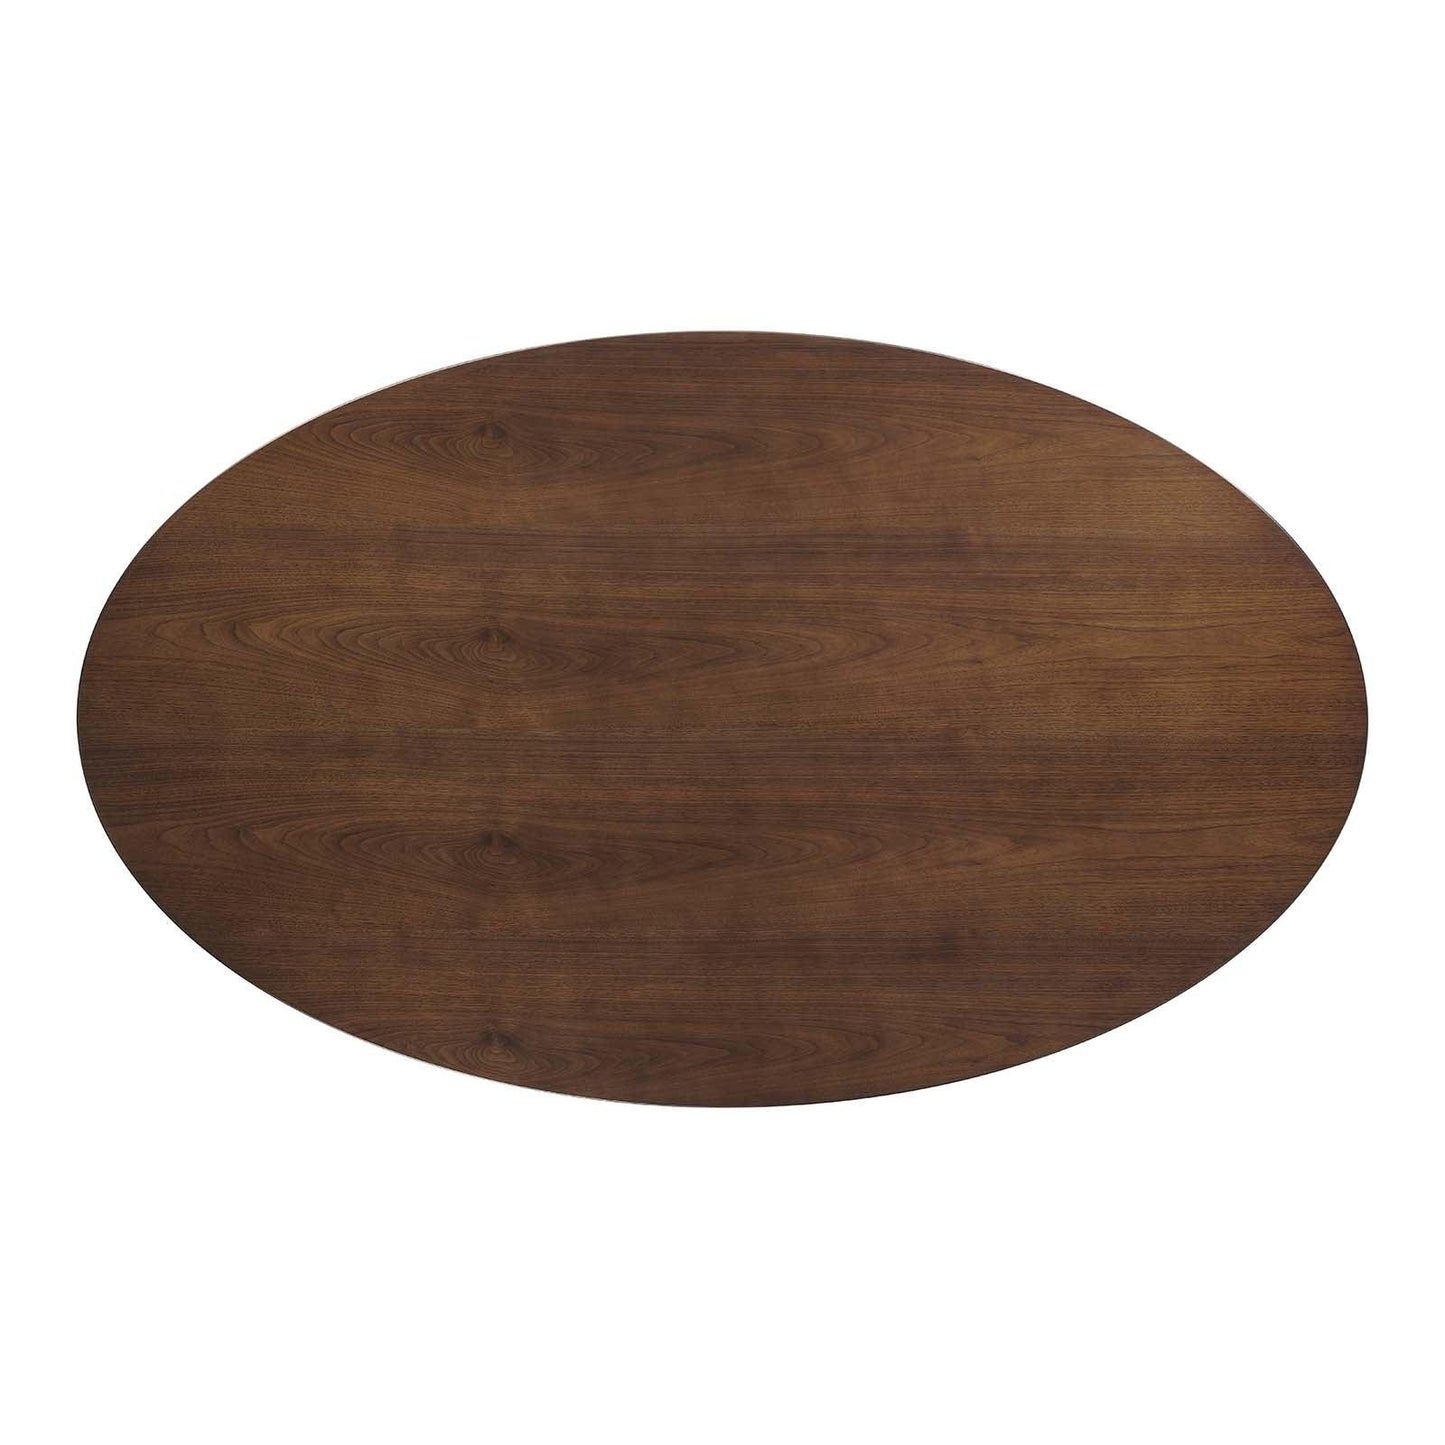 Modway Lippa 78" Oval Wood Dining Table FredCo